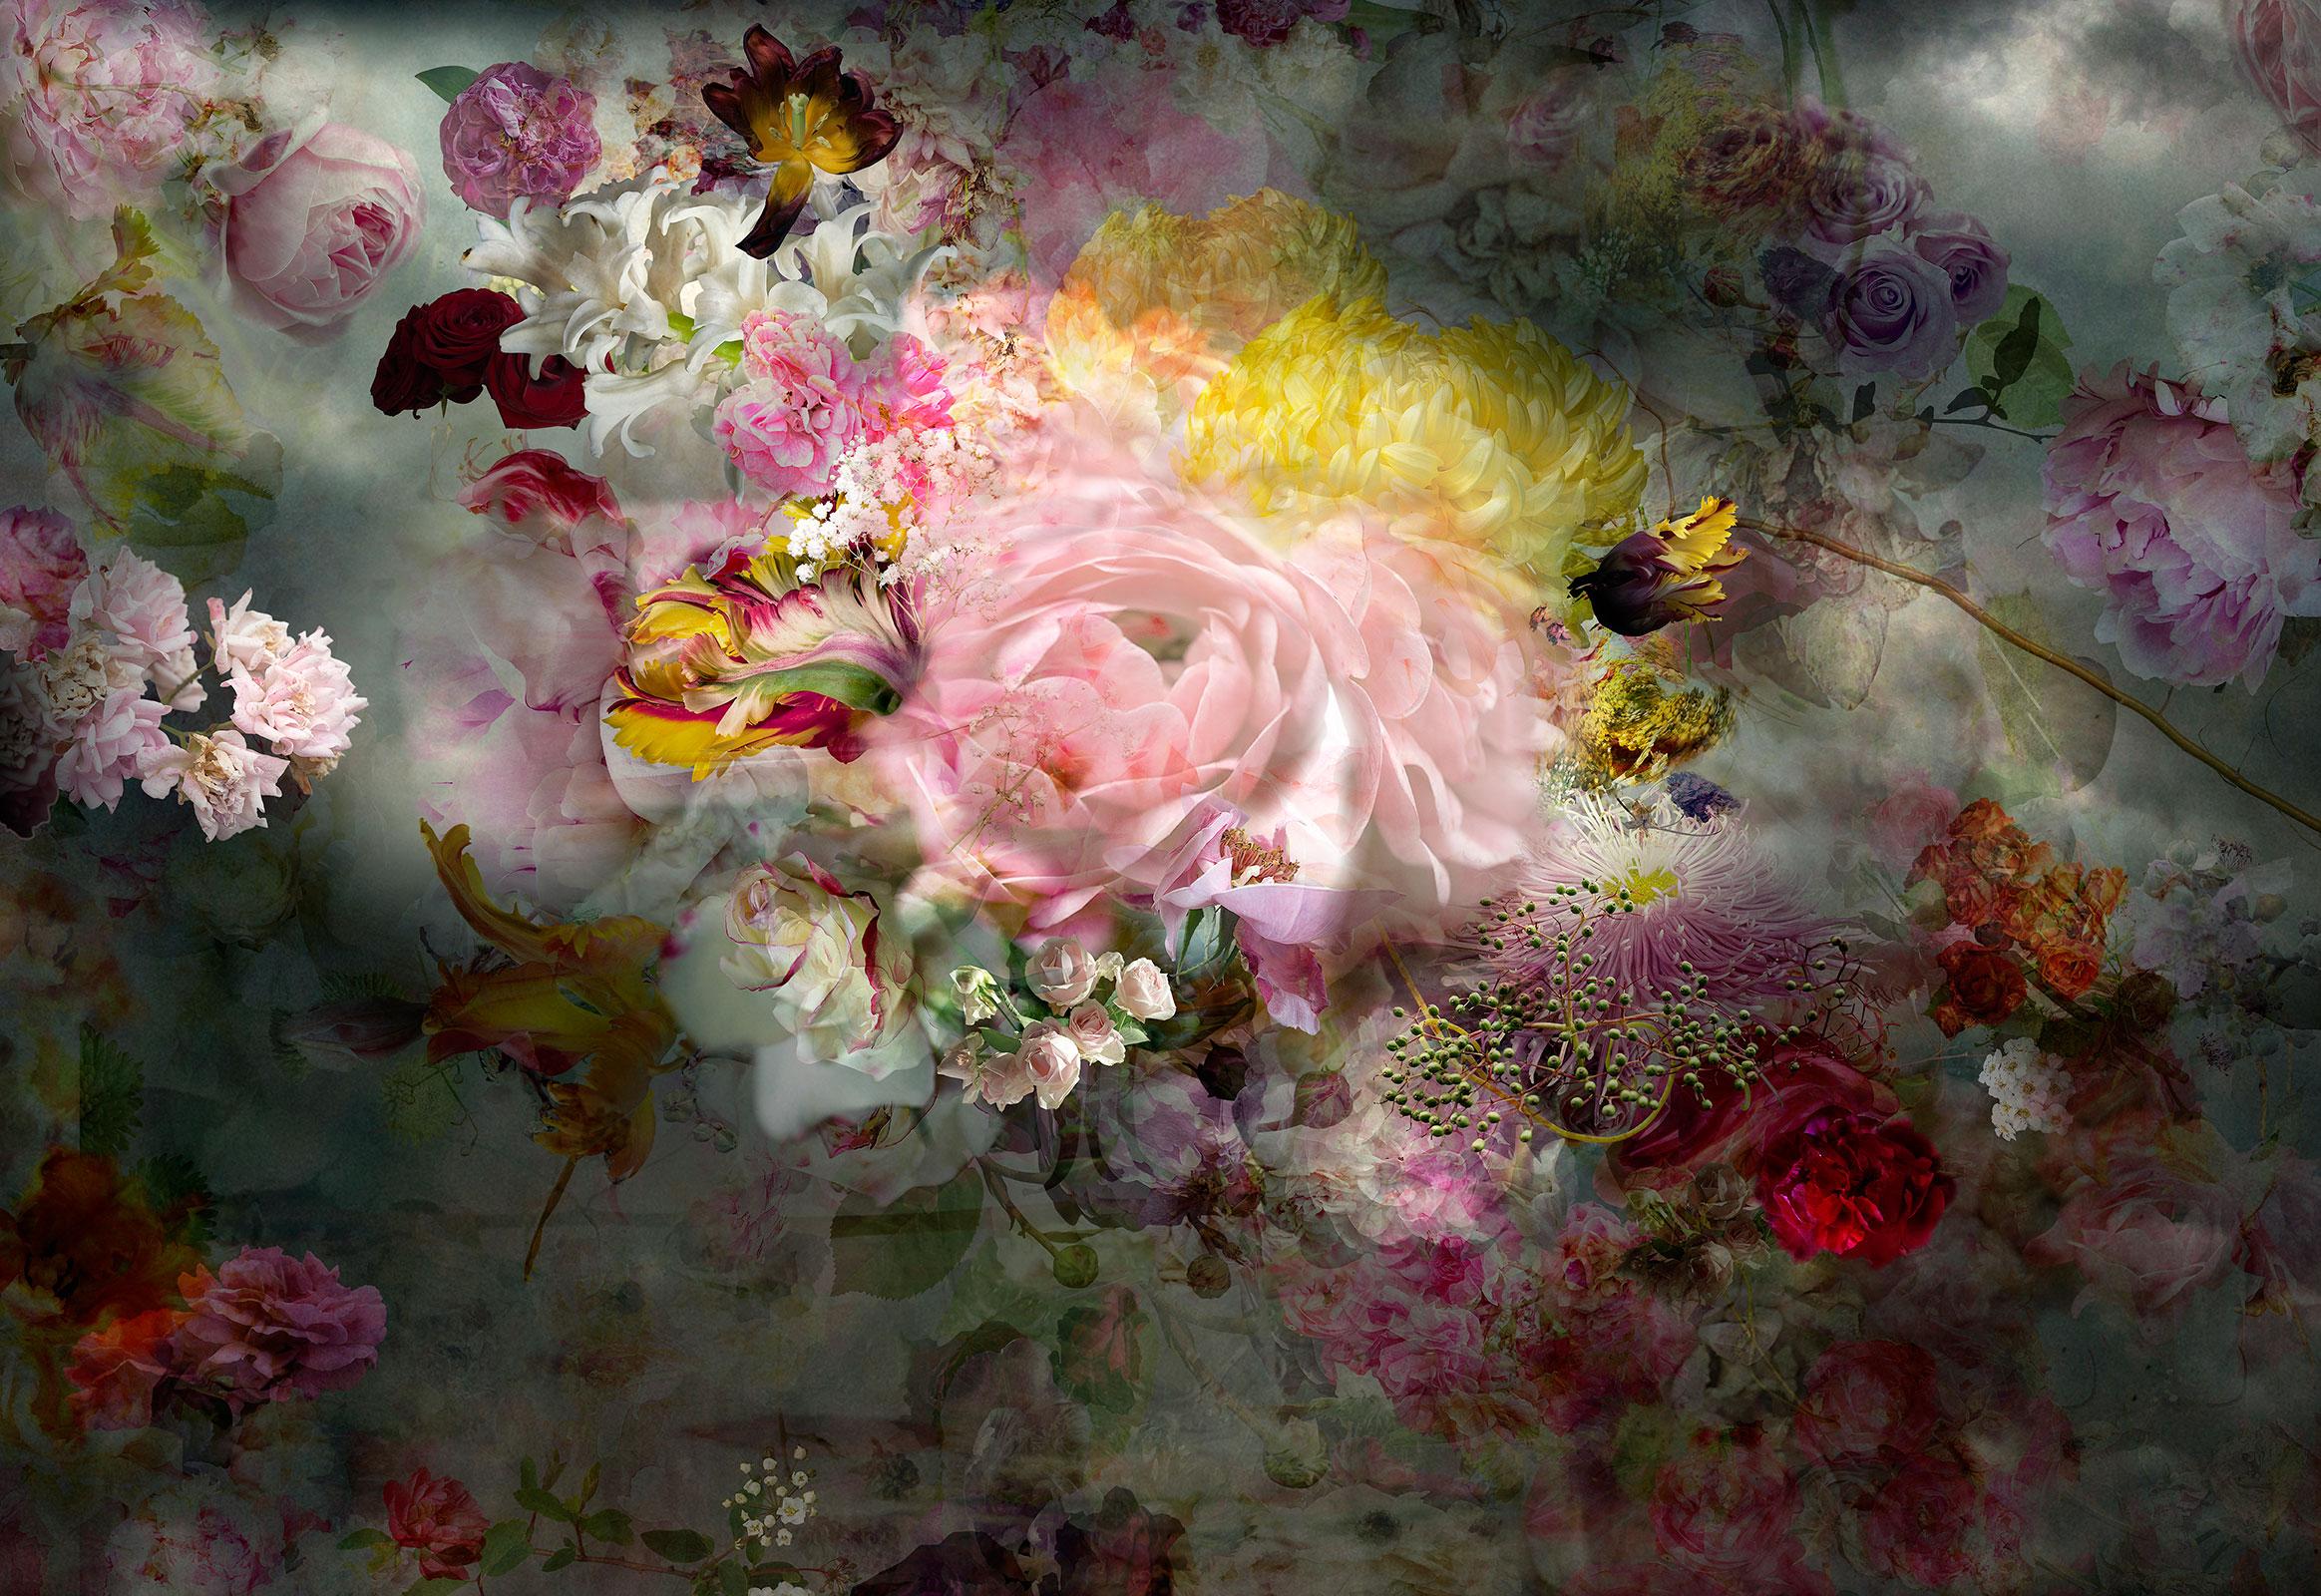 Isabelle Menin Still-Life Photograph - Solstice 10- still life floral abstract landscape contemporary photograph